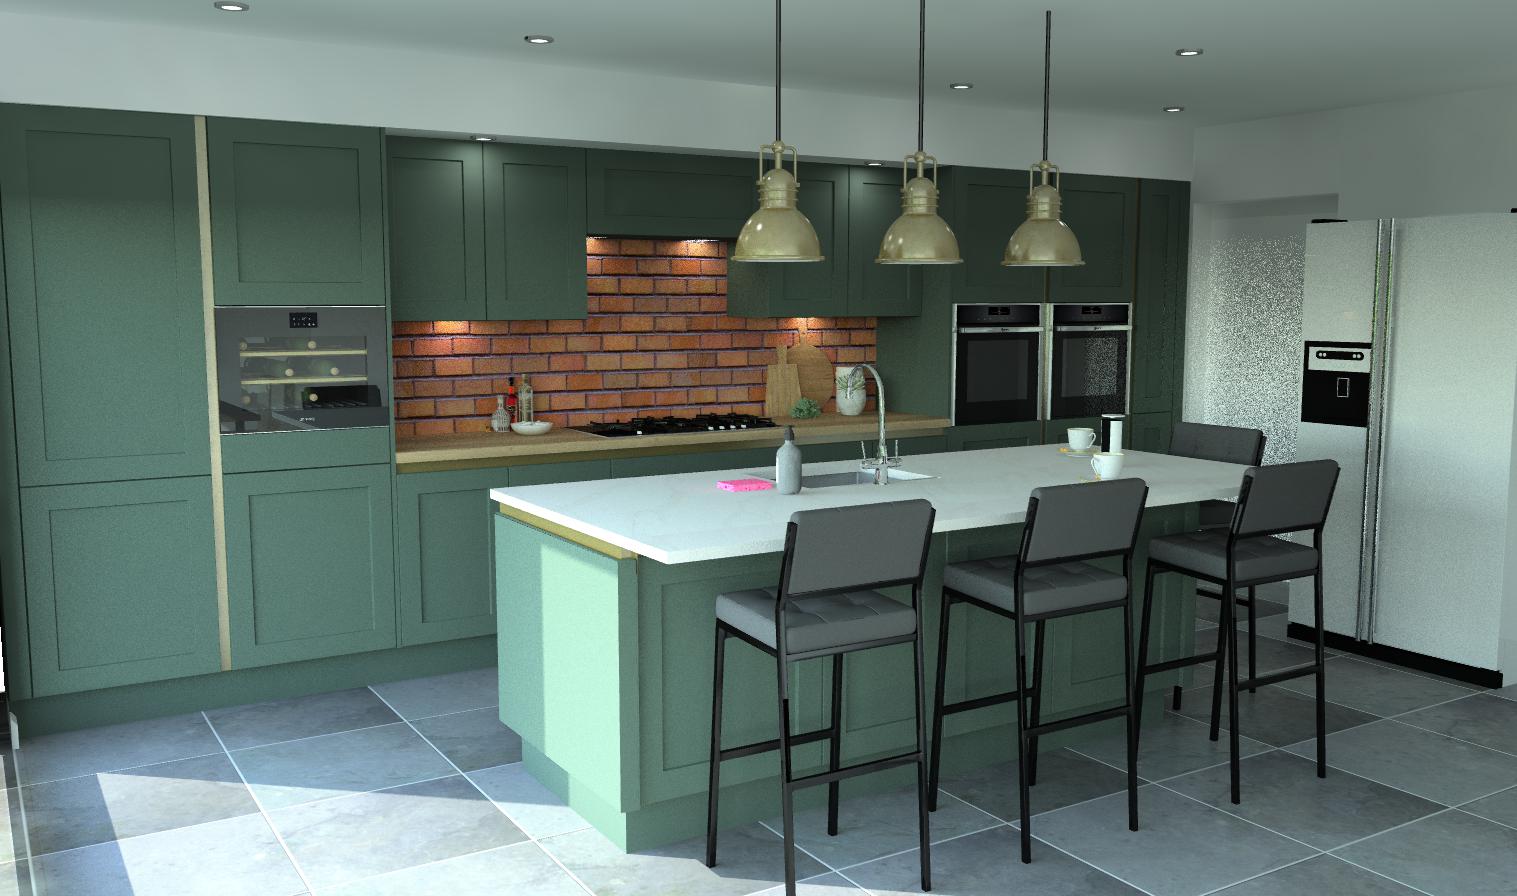 A green handleless Kitchen with brass rails. A wood worktop runs along the back bank with a hob built in. A white quartz worktop sits on the island containing a sink, pop up socket and a large open L-shape seating area.